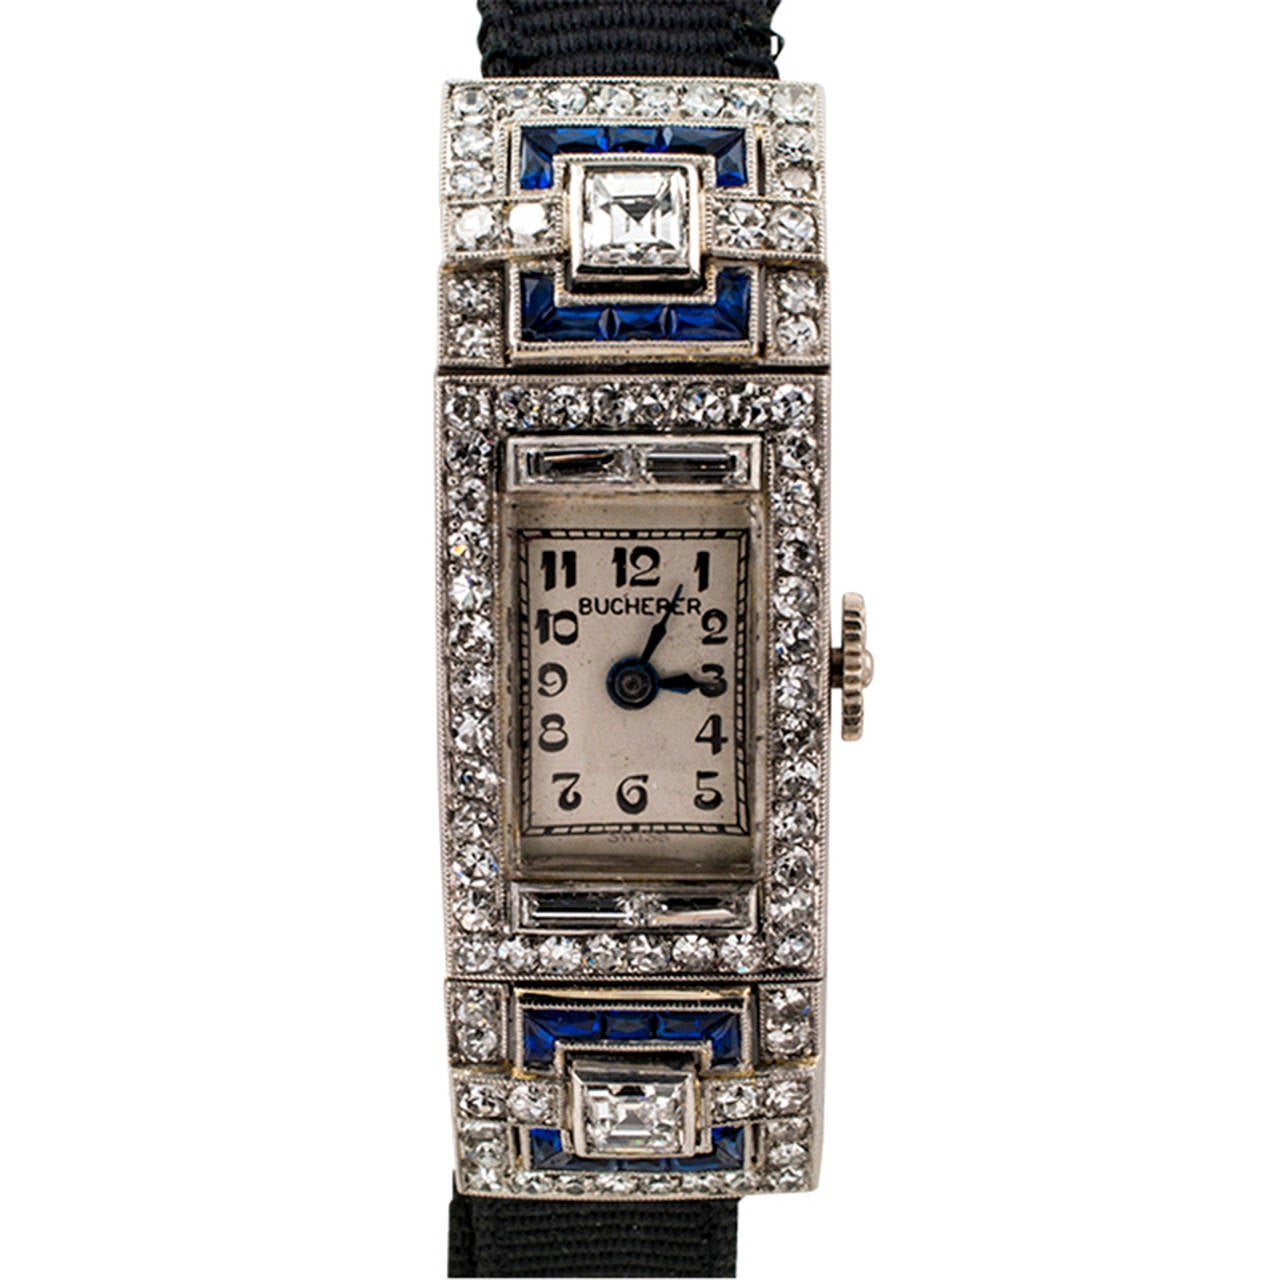 Bucherer Art Deco Diamond And Platinum Ladys Wristwatch

Here is one of those timeless timepieces, elegant and chic, so very, very 
Art Deco.  The rectangular case, nicely engraved on the sides, is embellished with eighty four diamonds of various